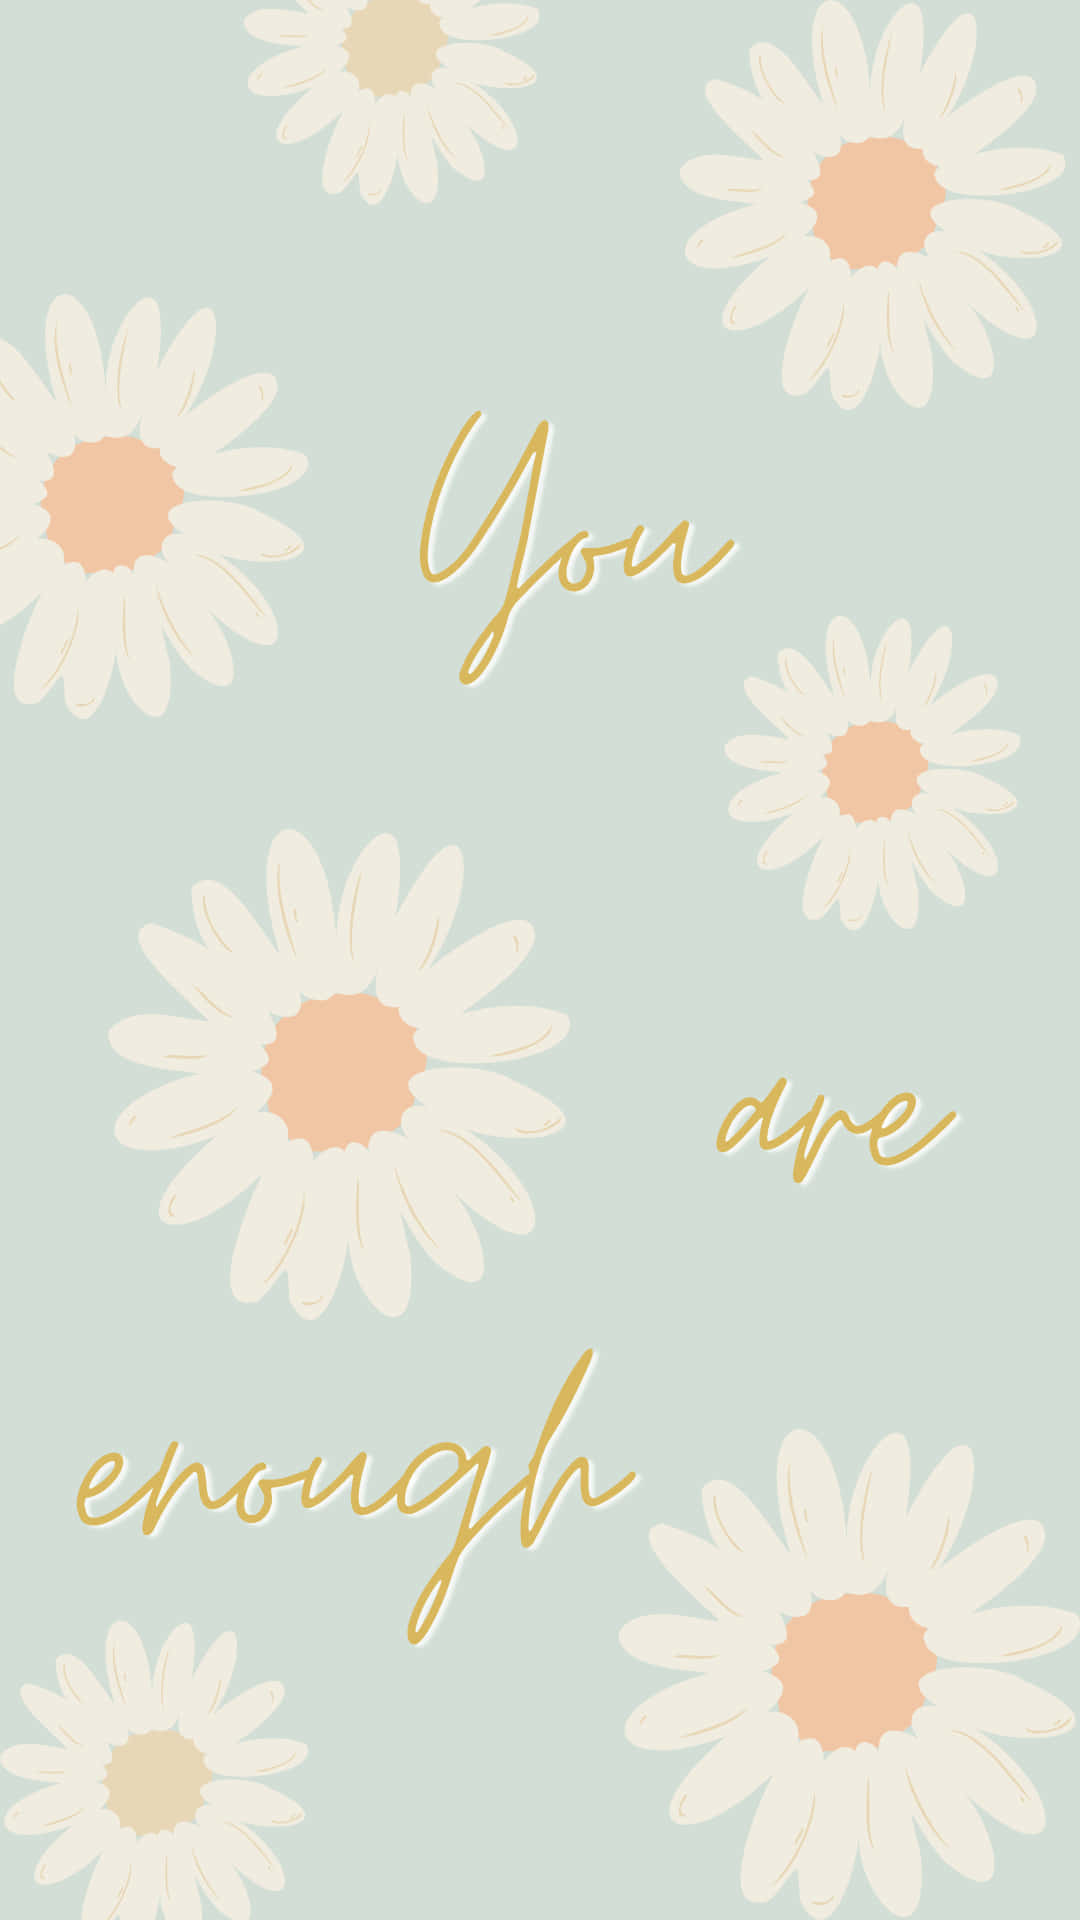 100+] You Are Enough Wallpapers 